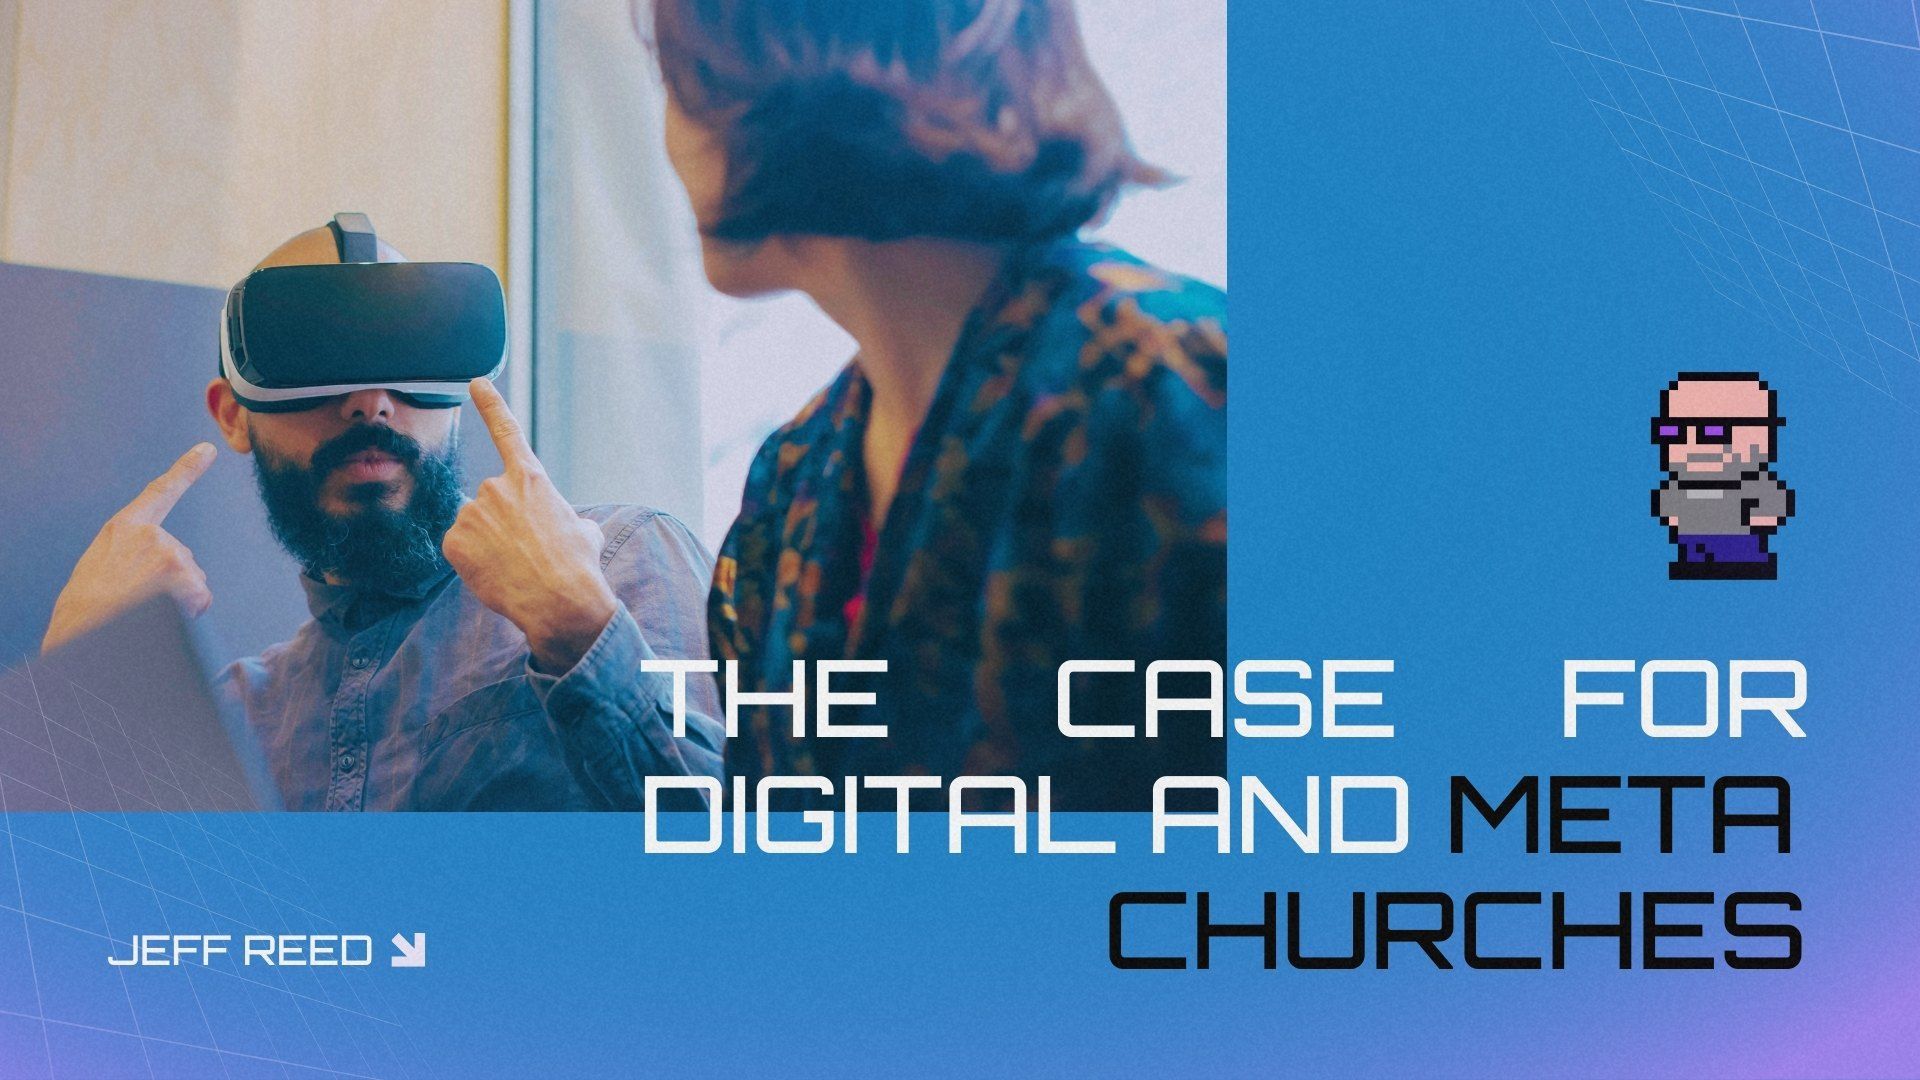 The Case for Digital and Meta Churches